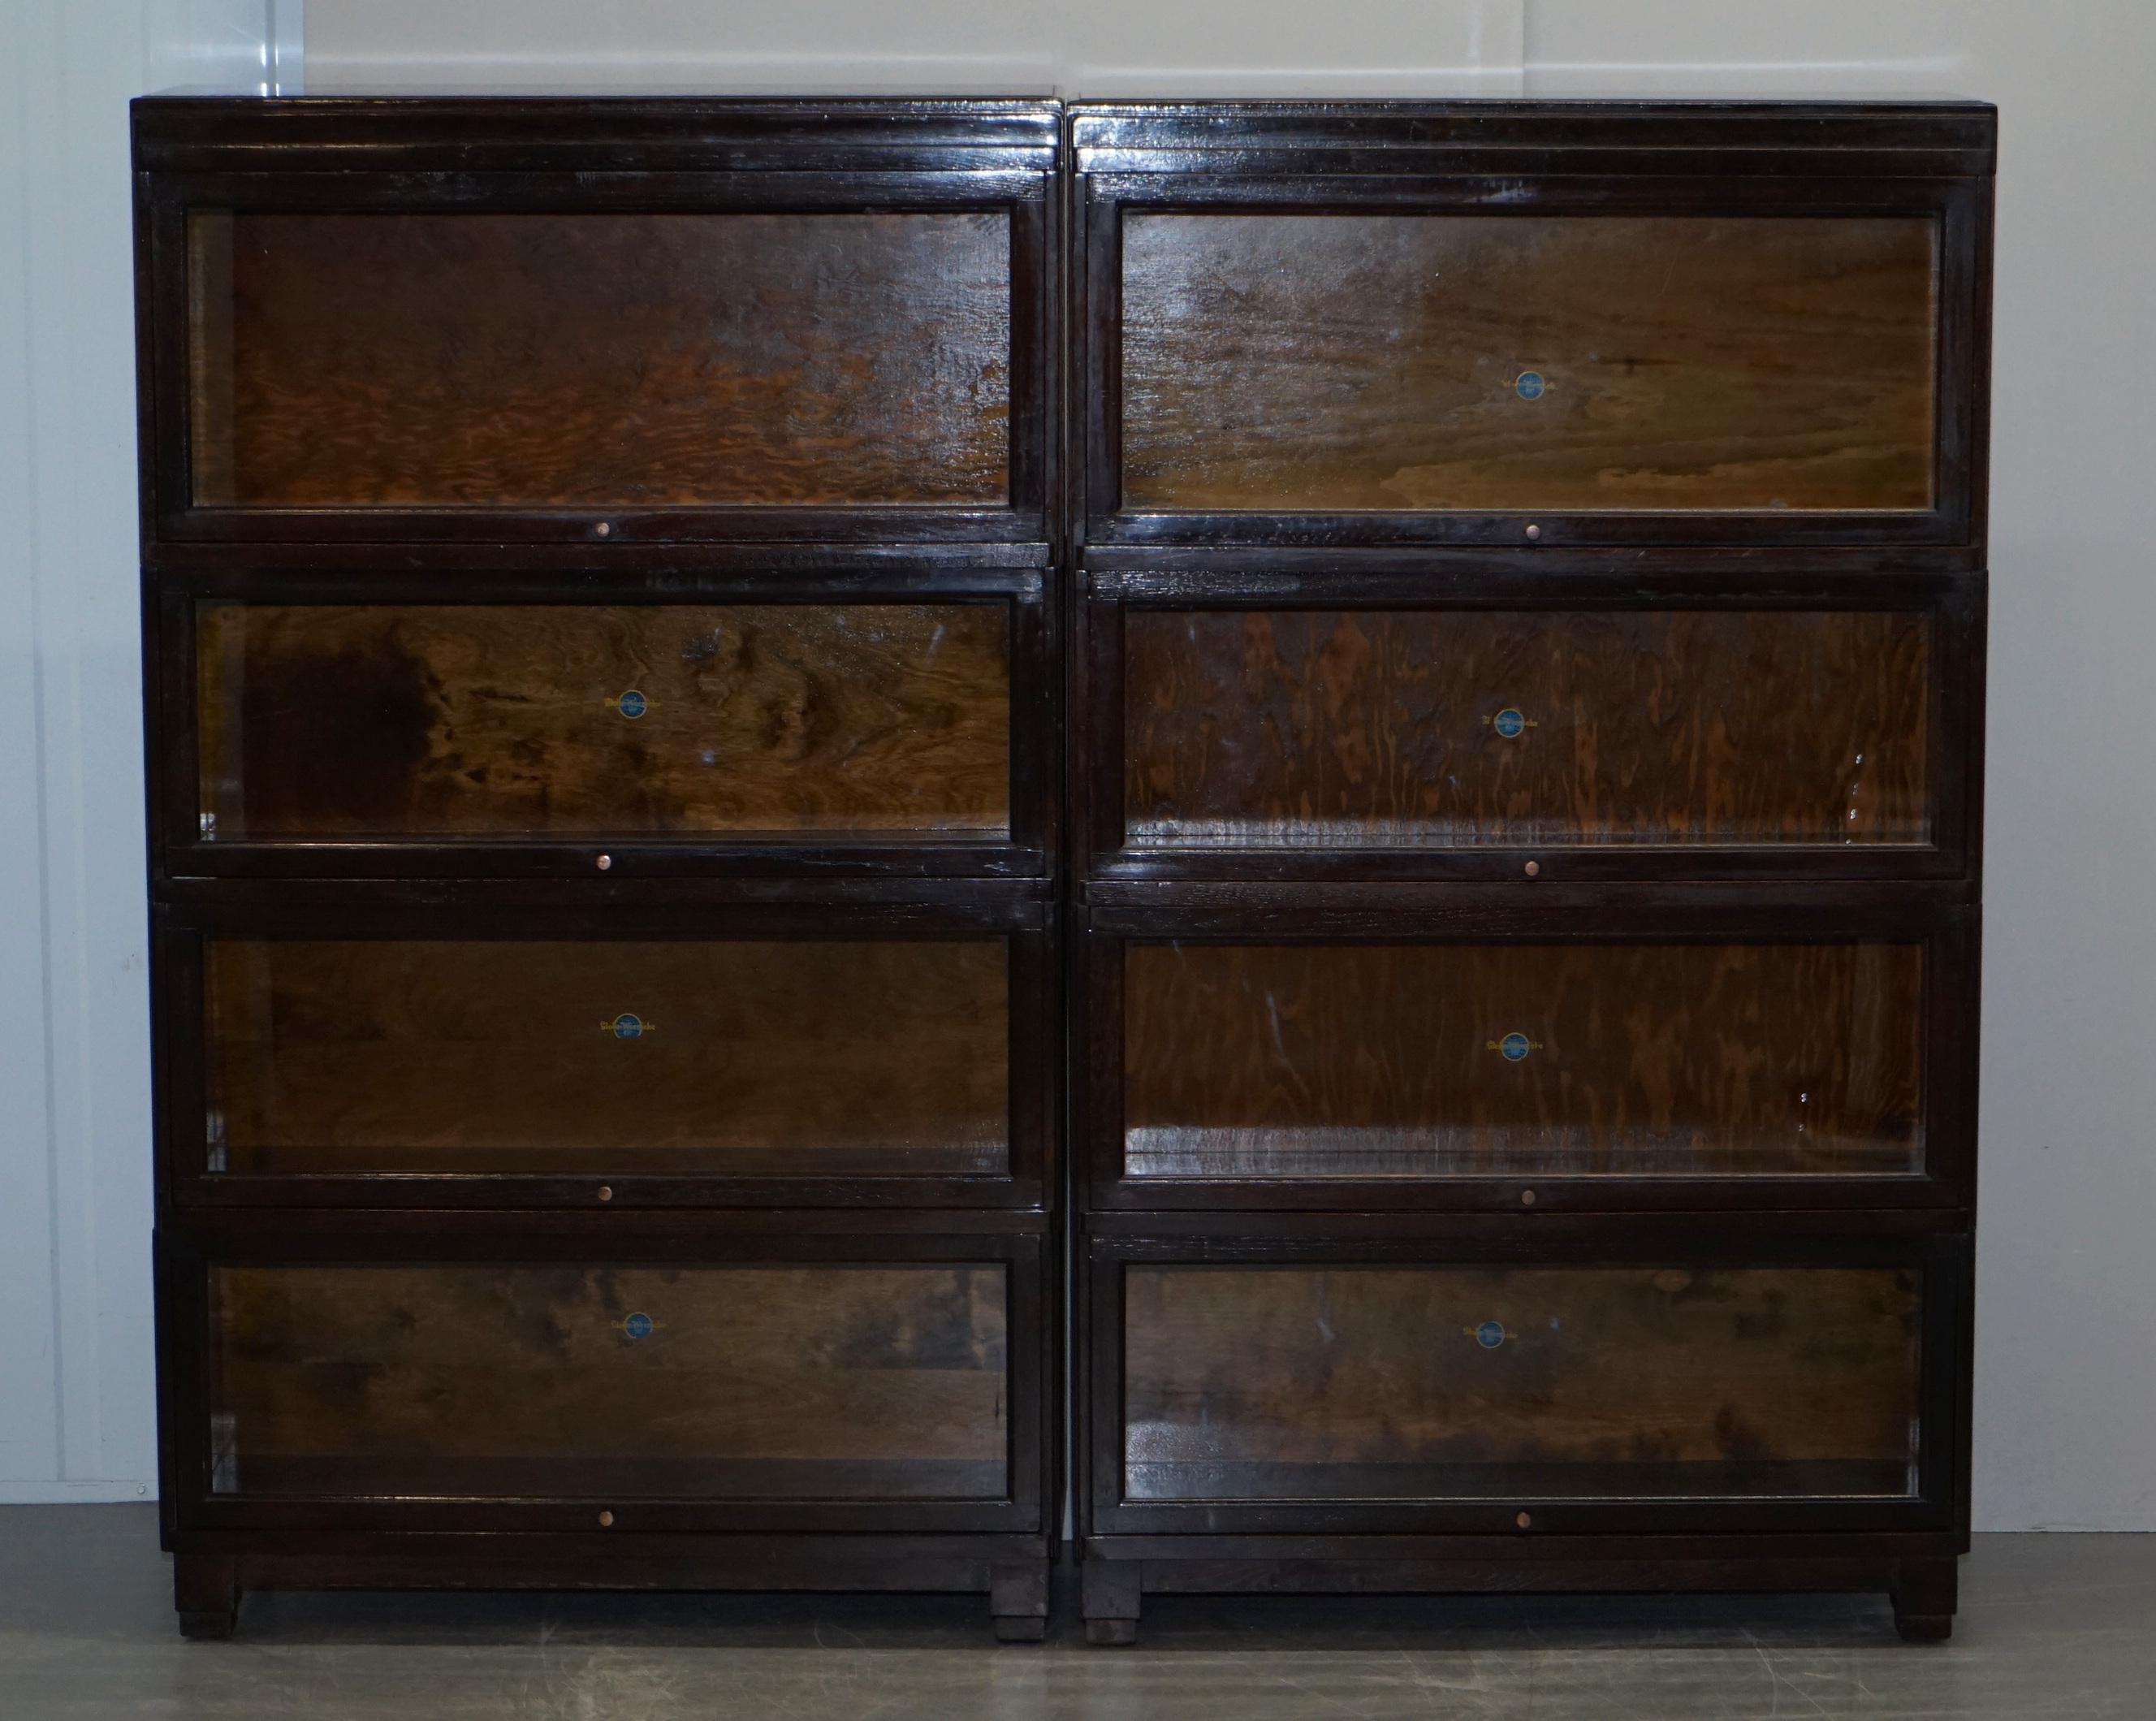 We are delighted to offer for sale this lovely pair of early circa 1900 Globe Wernicke stacking legal bookcases in solid oak 

A very good looking and well-made pair, there were a number of companies making this type of bookcase in the late